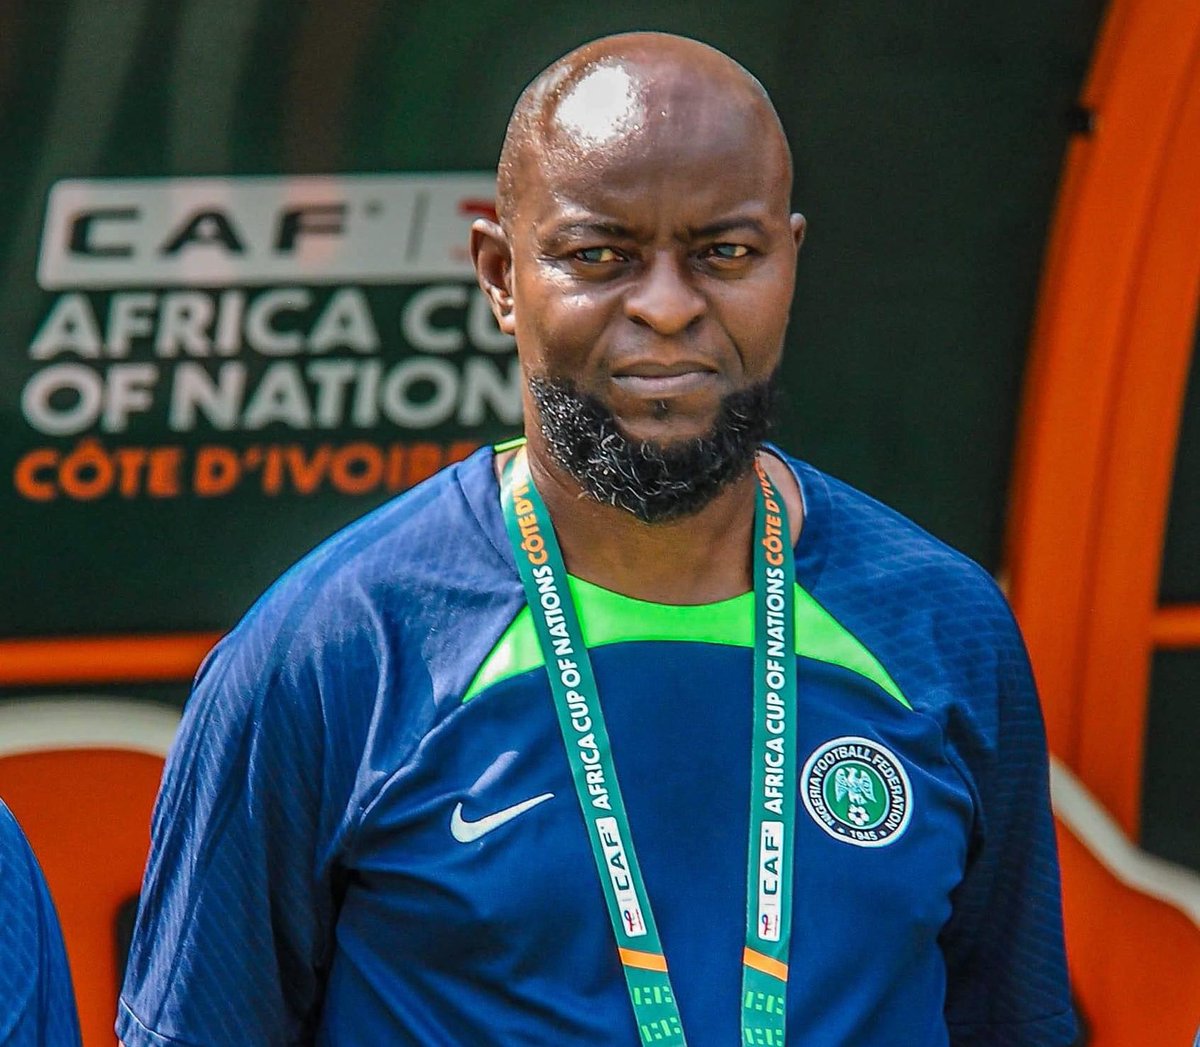 Enough of the talk…now let’s get to work! Finidi George - New Super Eagles Manager Let’s get behind him and the team and hope we excel!!!